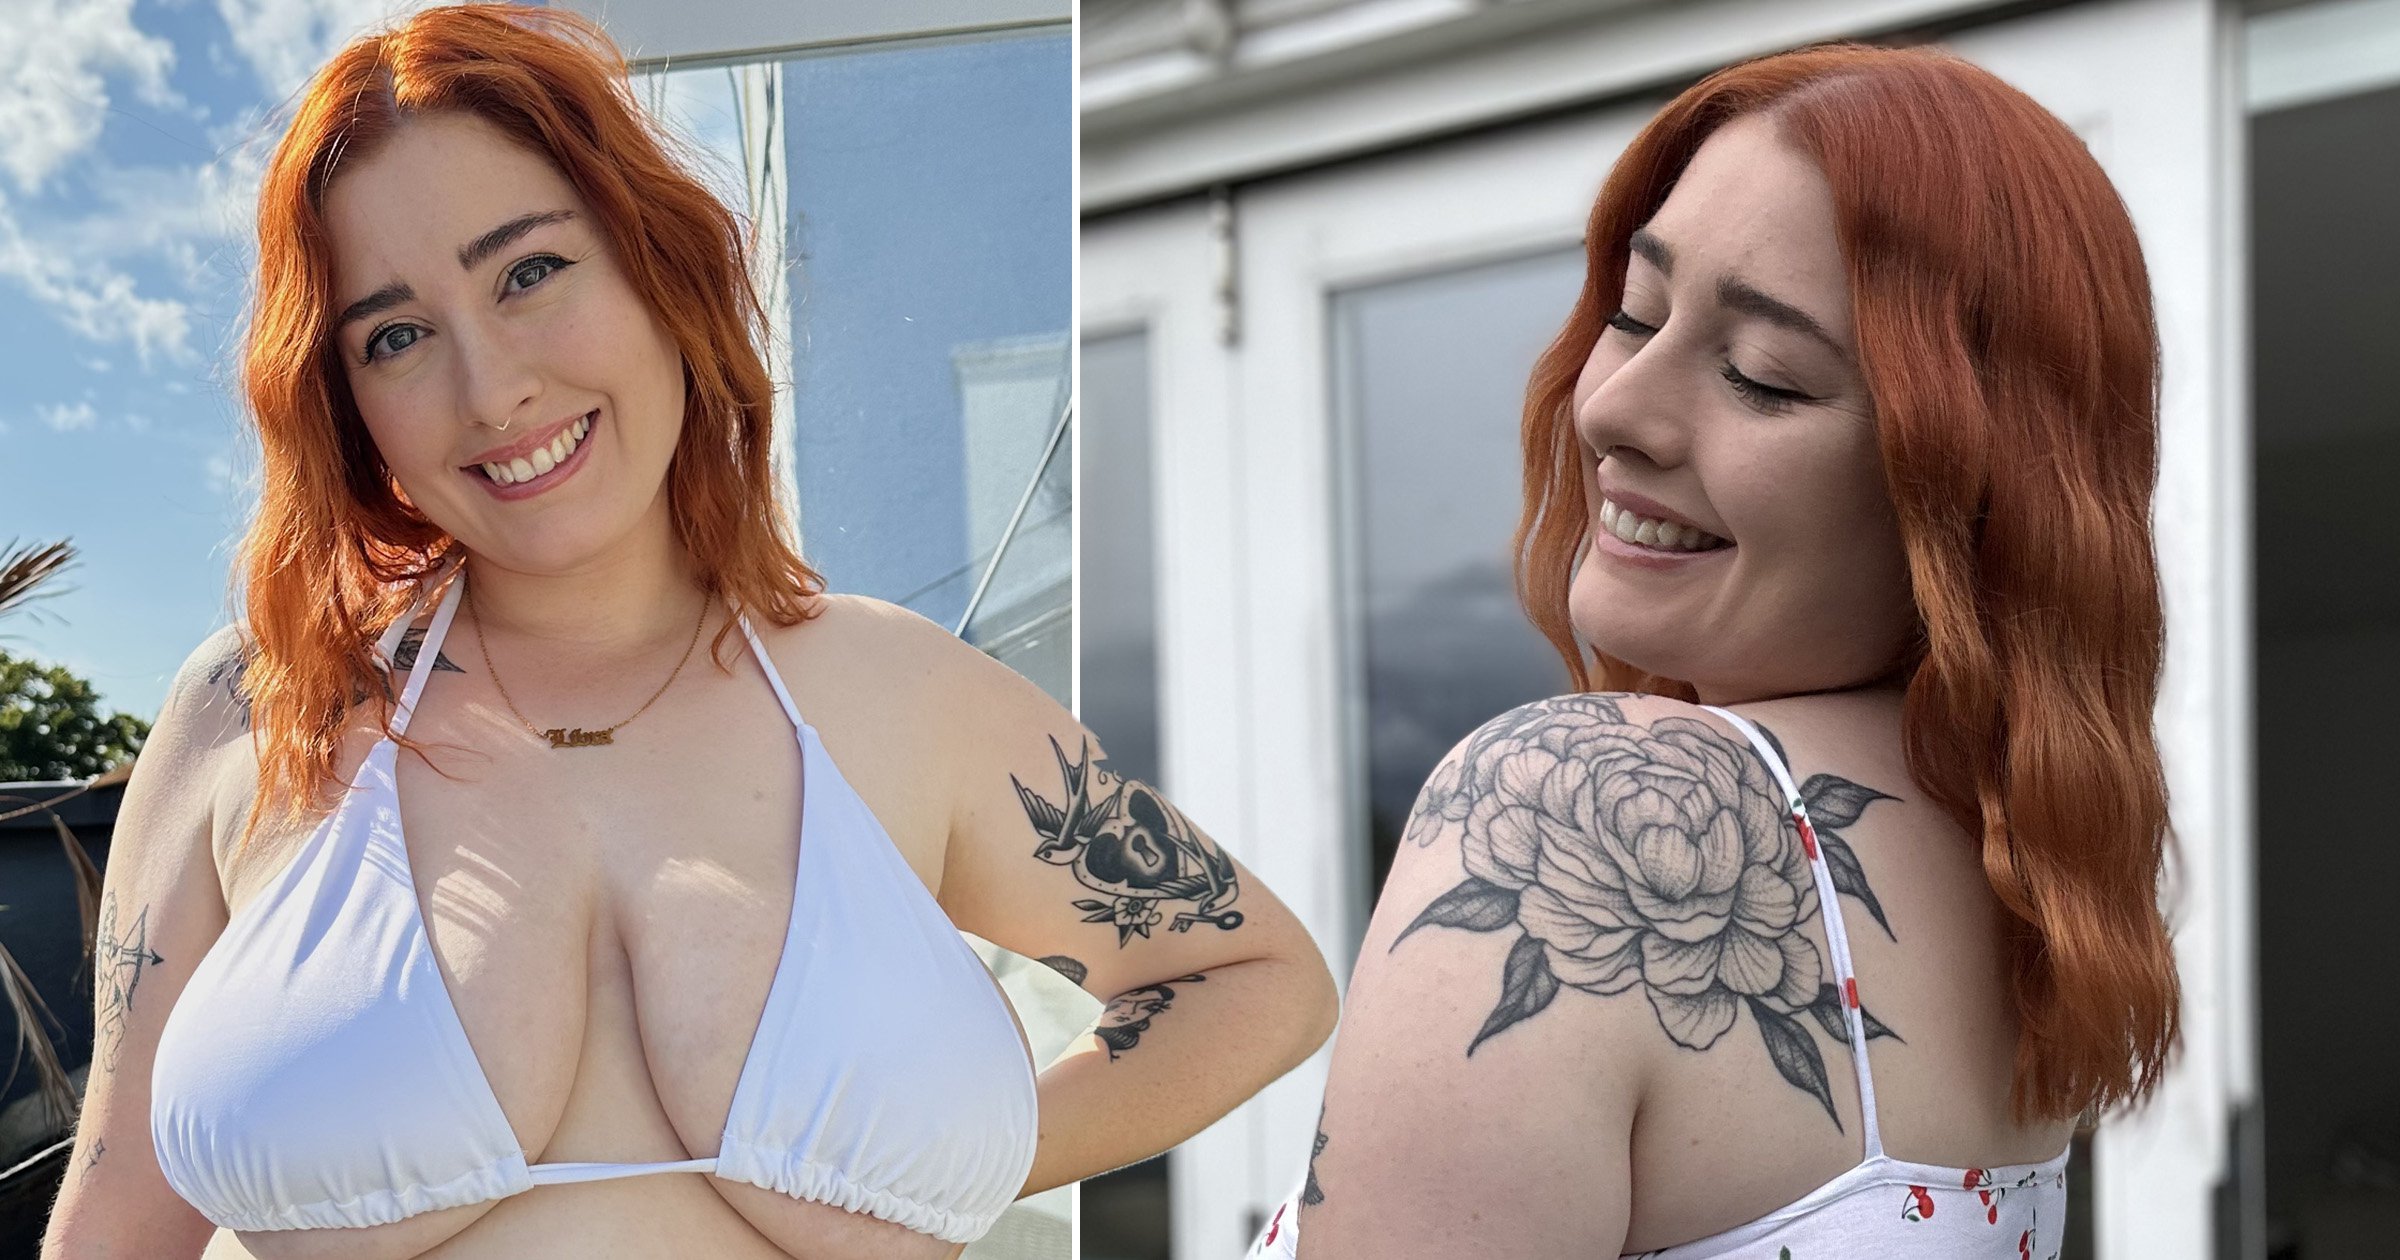 amber nicole jackson recommends cum on dress pic